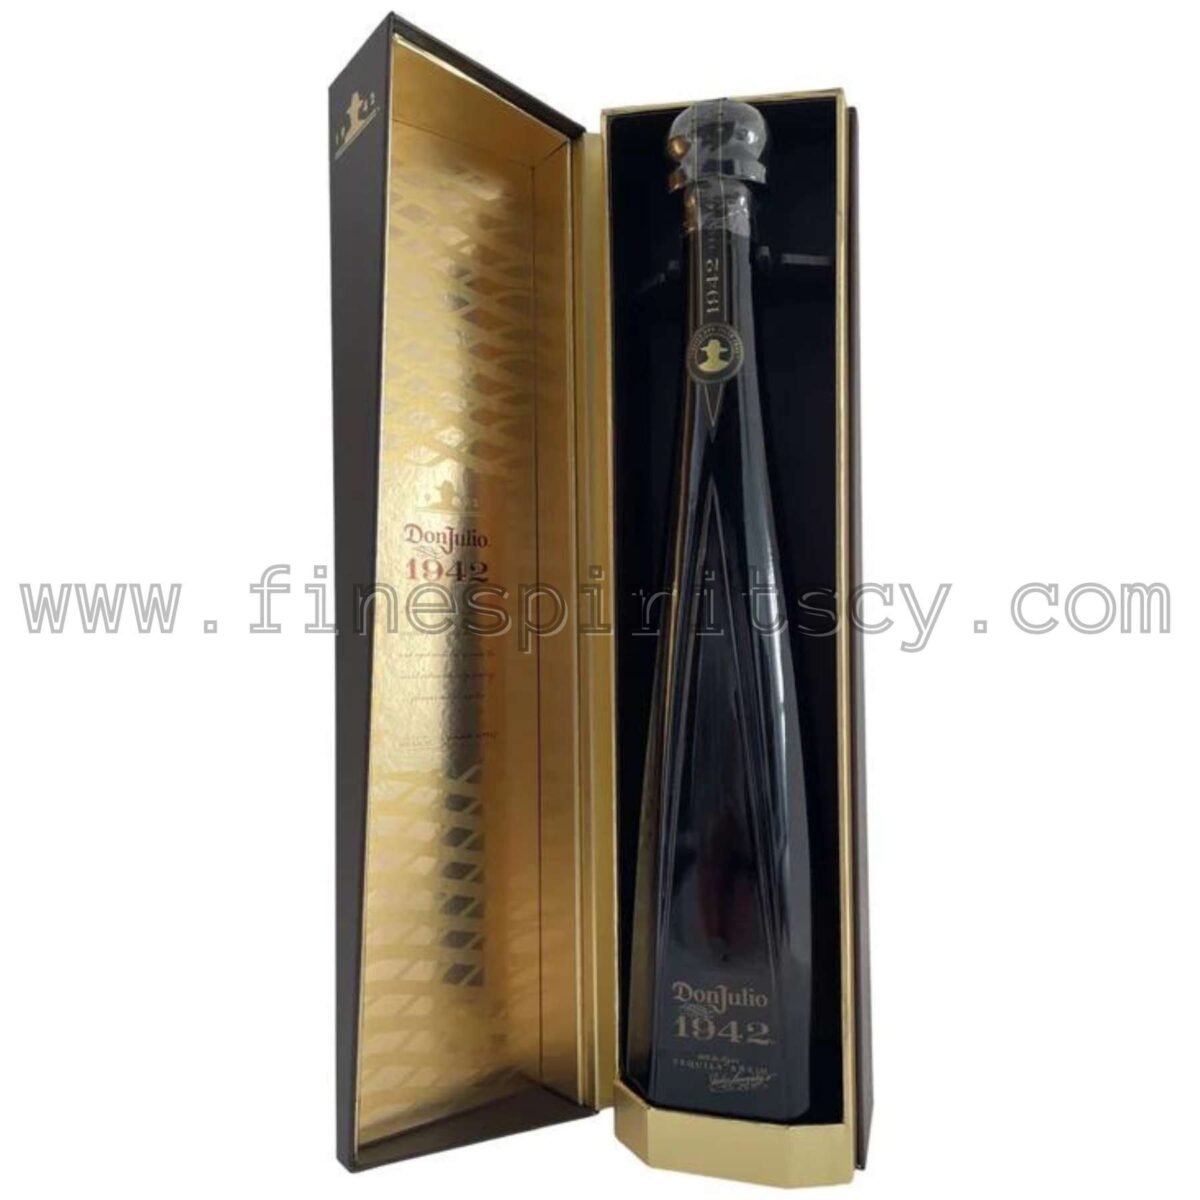 Don Julio 1942 100% Agave Weber 38% Alcohol 38 ABV Gonzales Open Box